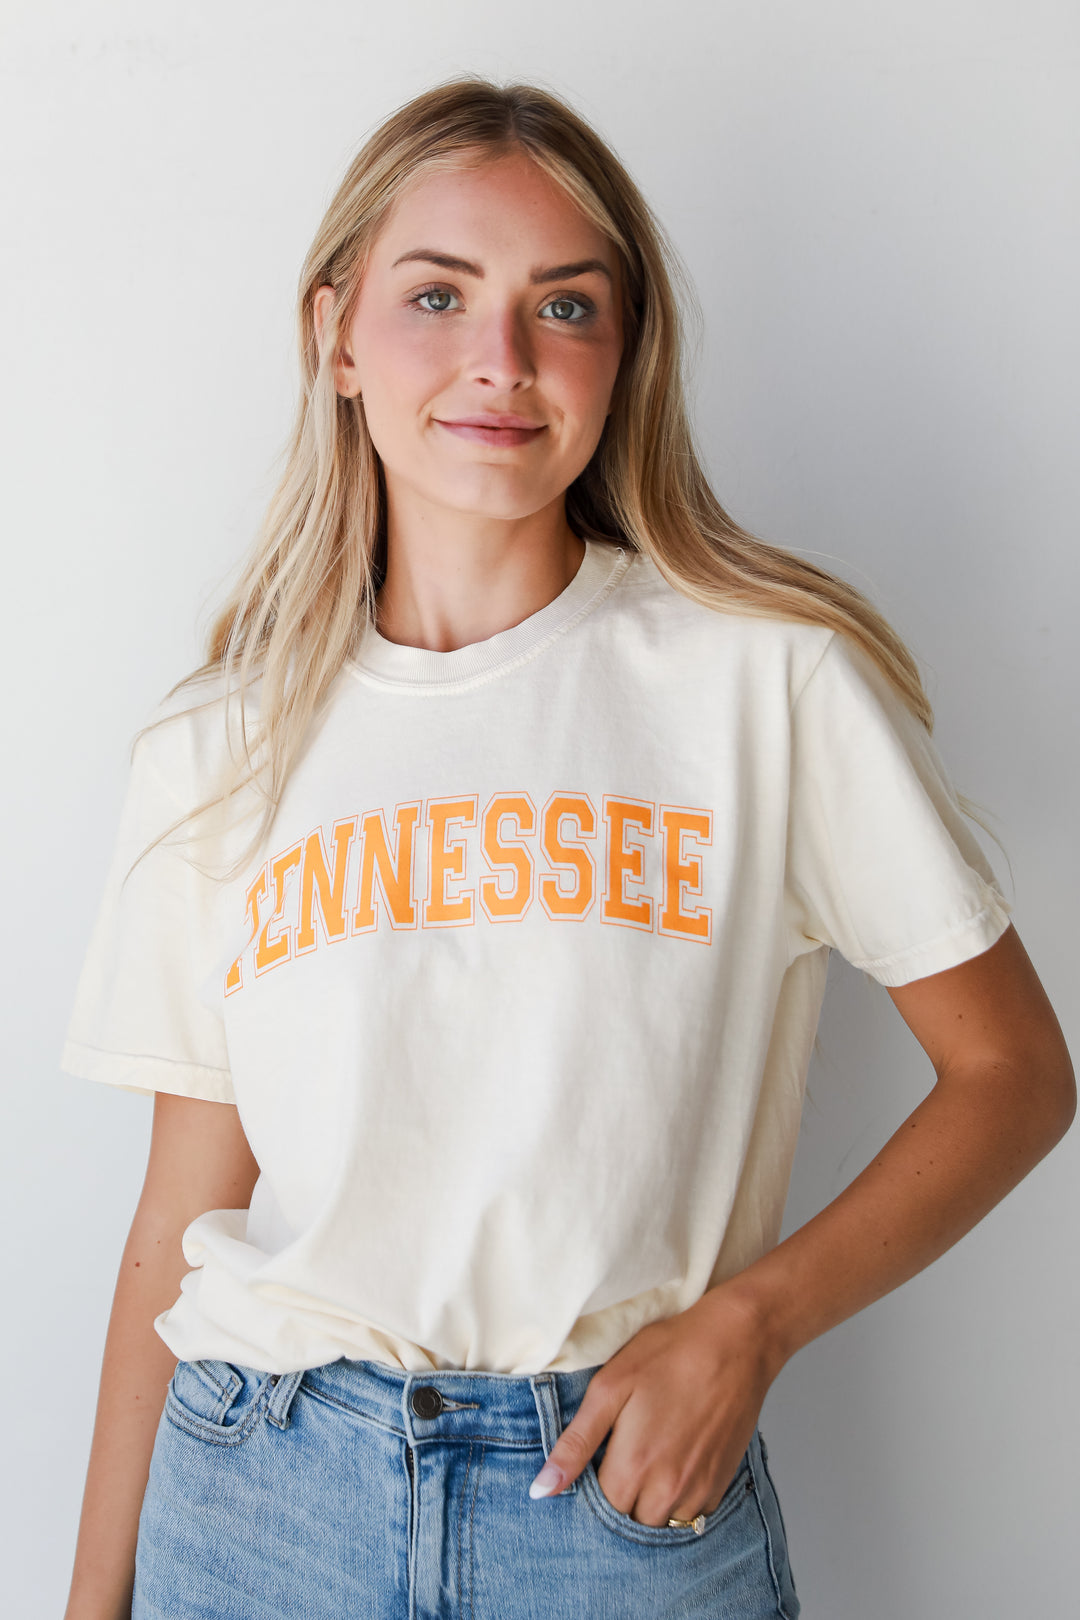 Ivory Tennessee Tee front view